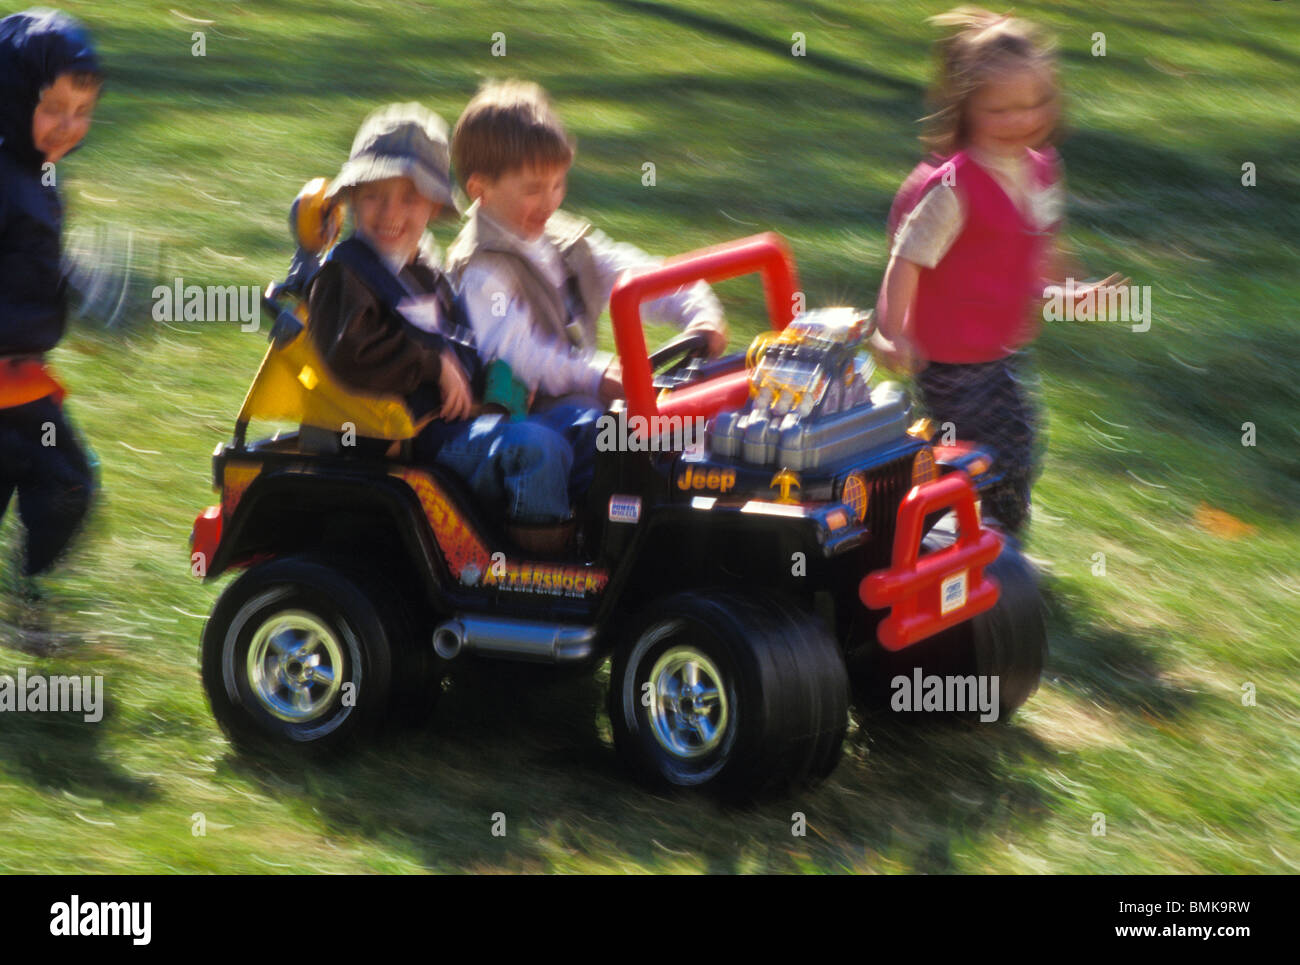 Two 3 4 5 Year Old Boys Drive Small Childs Off Road Style